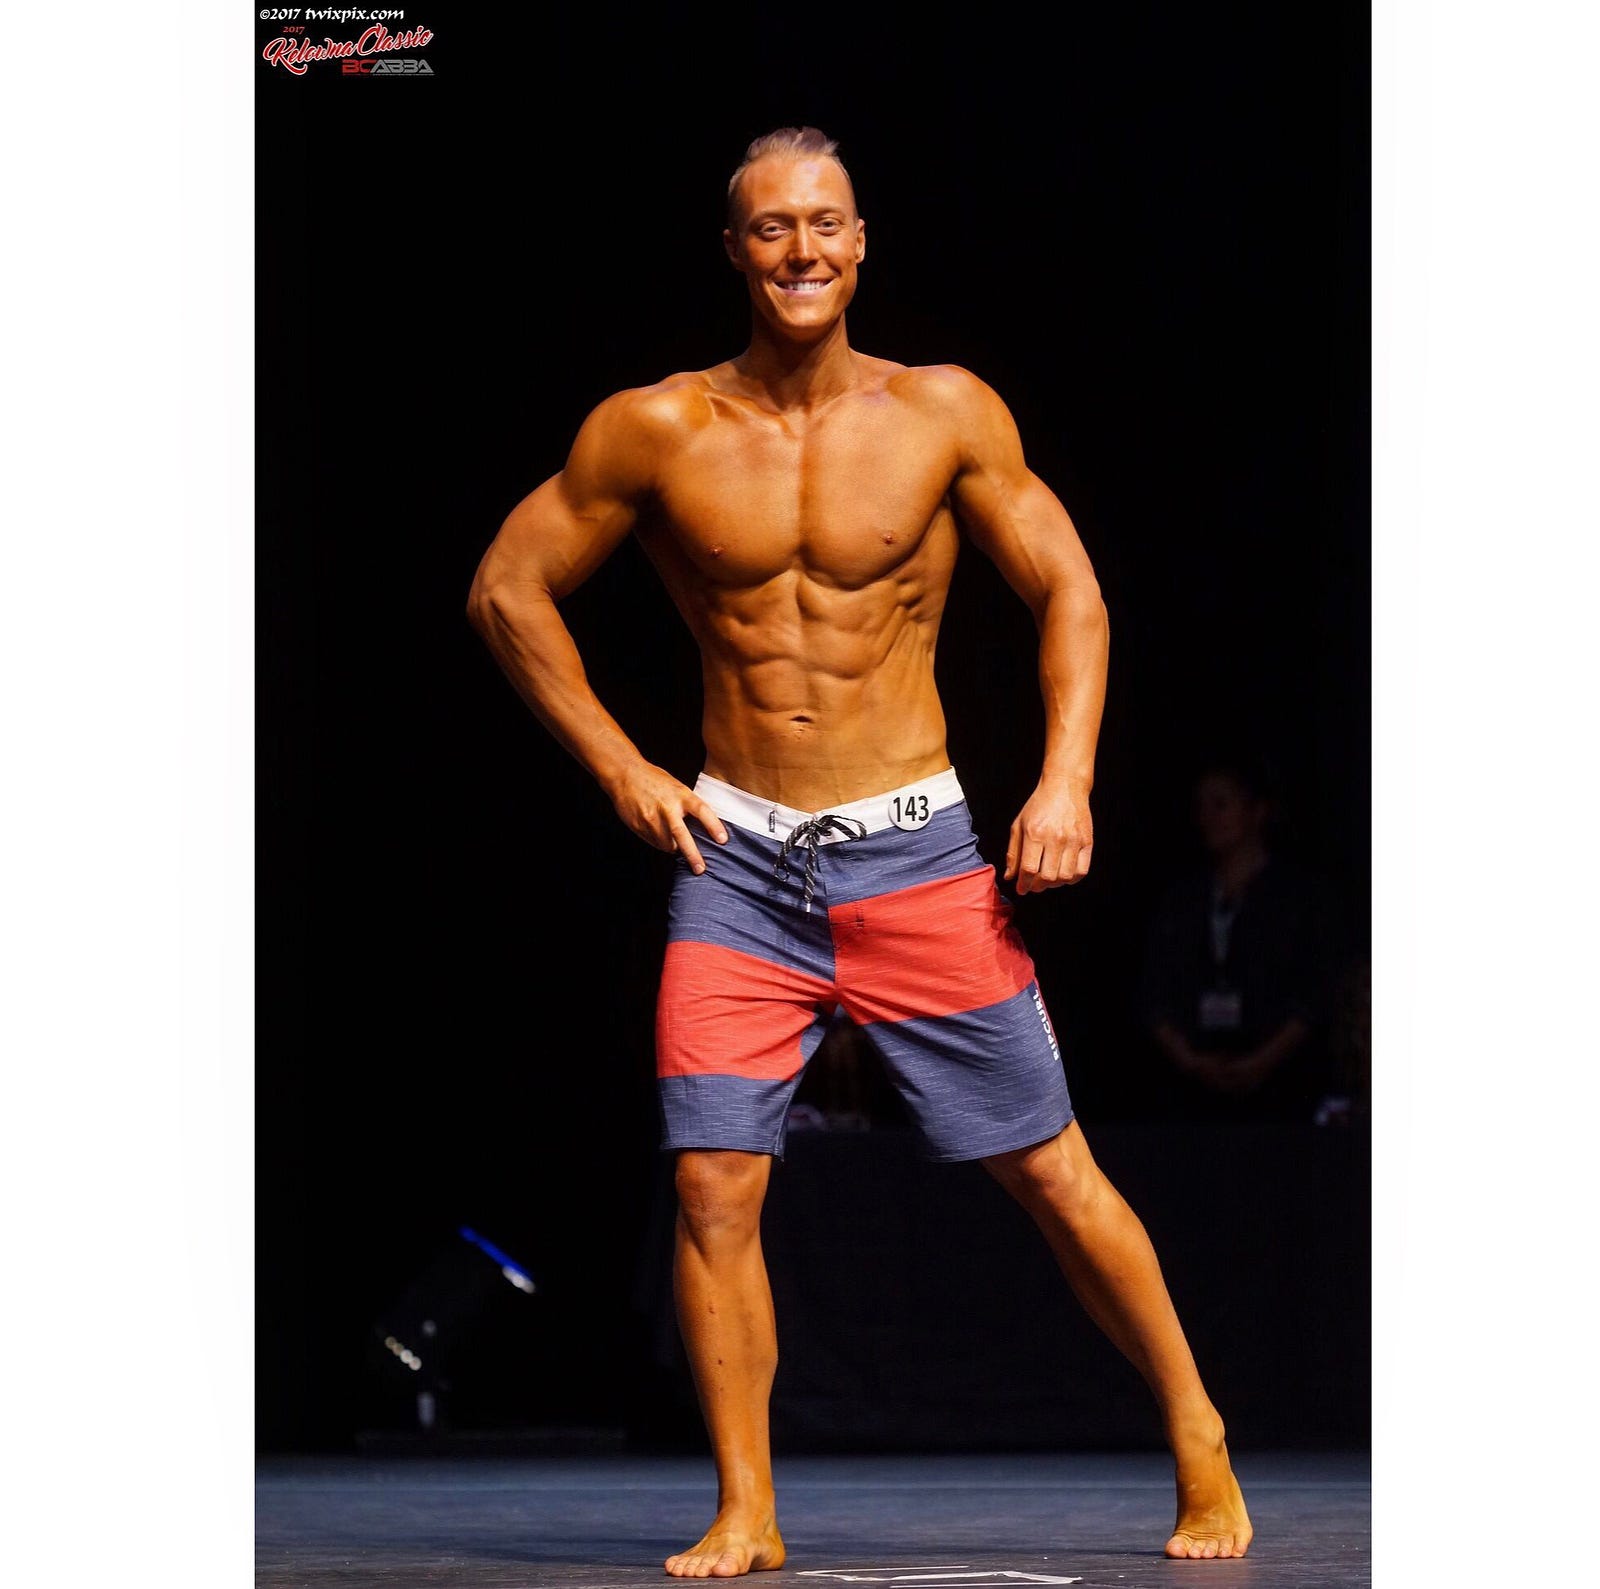 Is Competing in Bodybuilding/Men’s Physique Healthy?